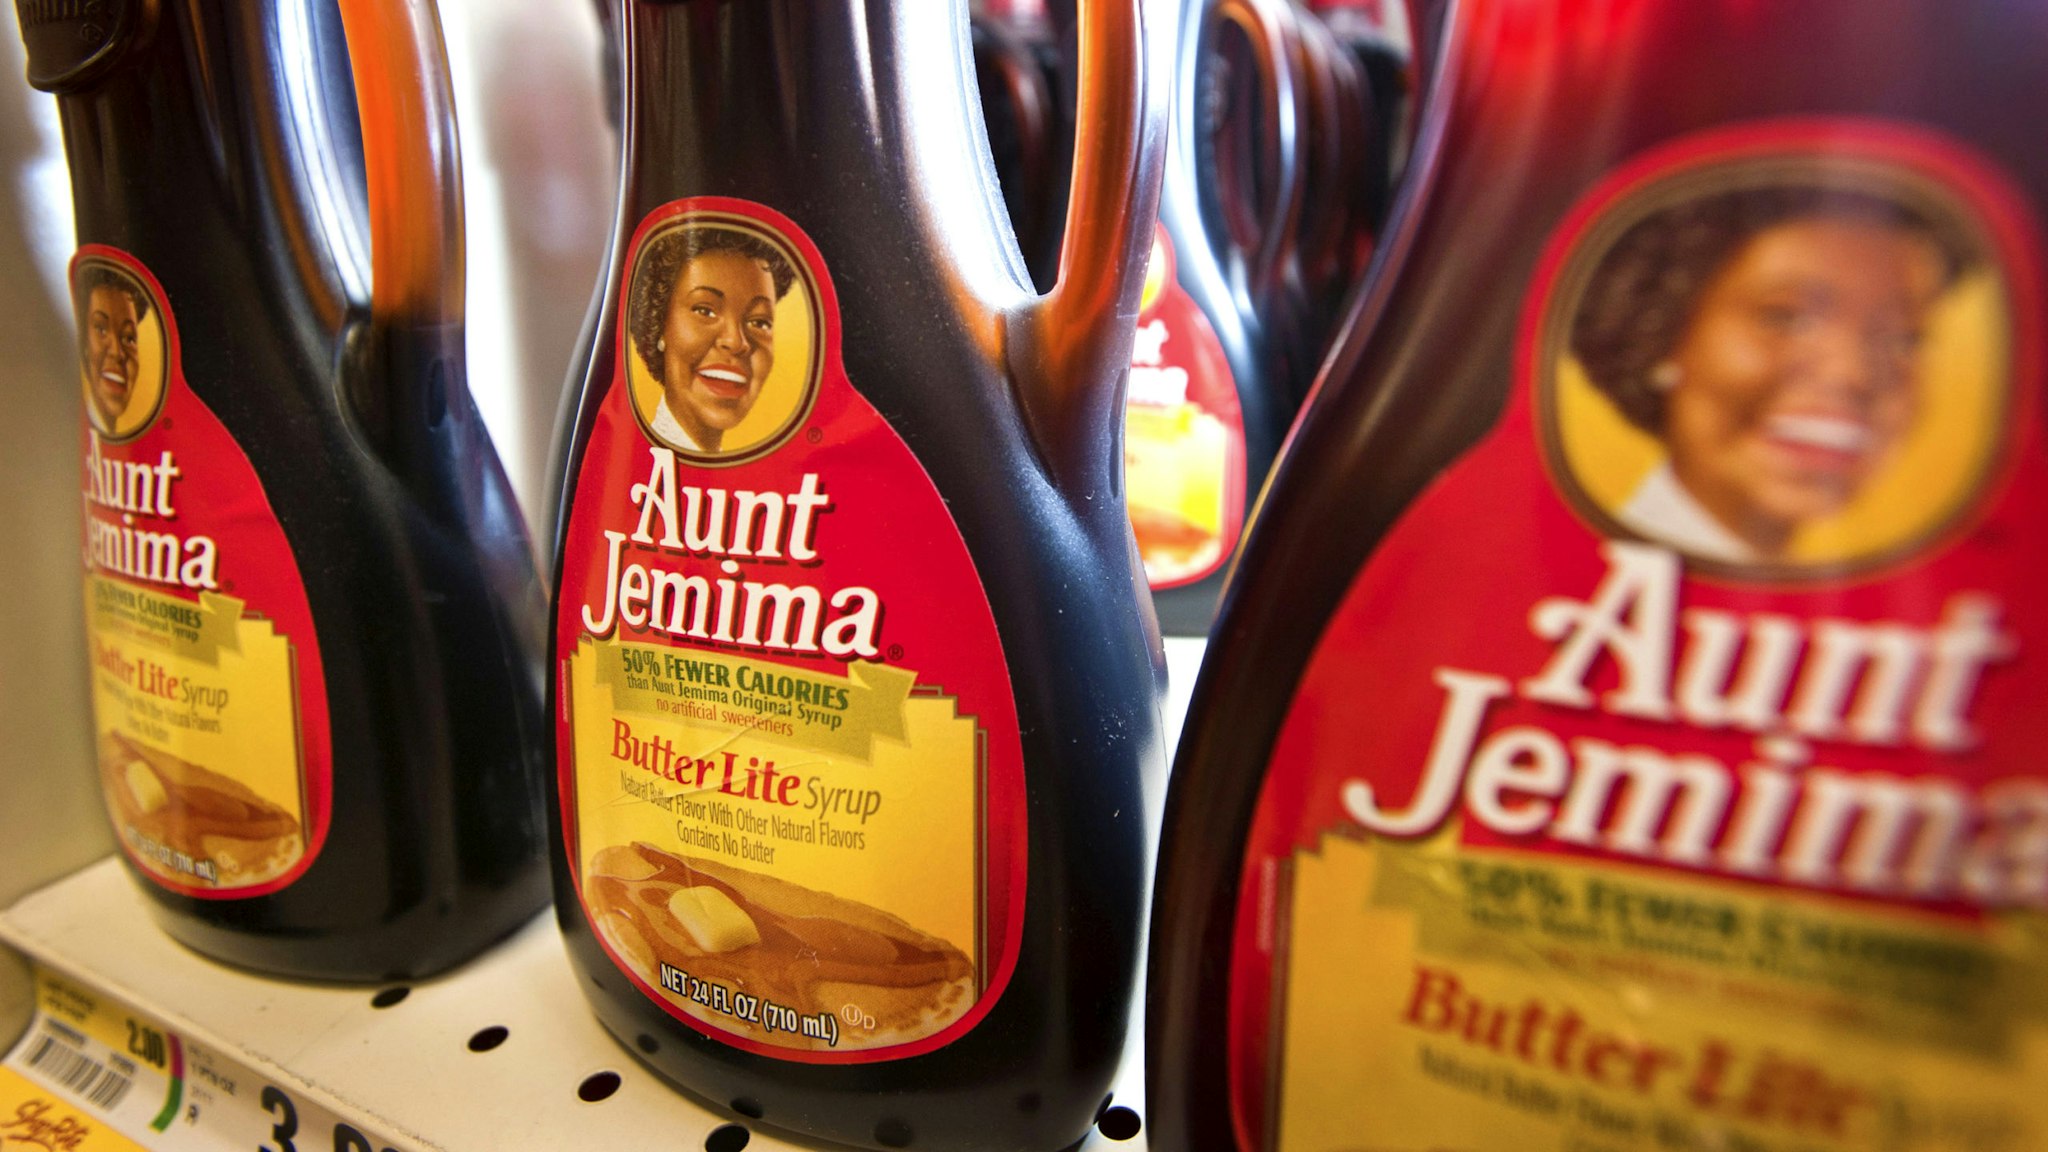 Bottles of PepsiCo Inc. Aunt Jemima syrup are displayed for sale at a ShopRite Holdings Ltd. grocery store in Stratford, Connecticut, U.S., on Wednesday, Aug. 3, 2011. PepsiCo Inc. reported growth for the second quarter of 2011 partly due to the acquisition of Wimm-Bill-Dann, the leading dairy and juice company in Russia.